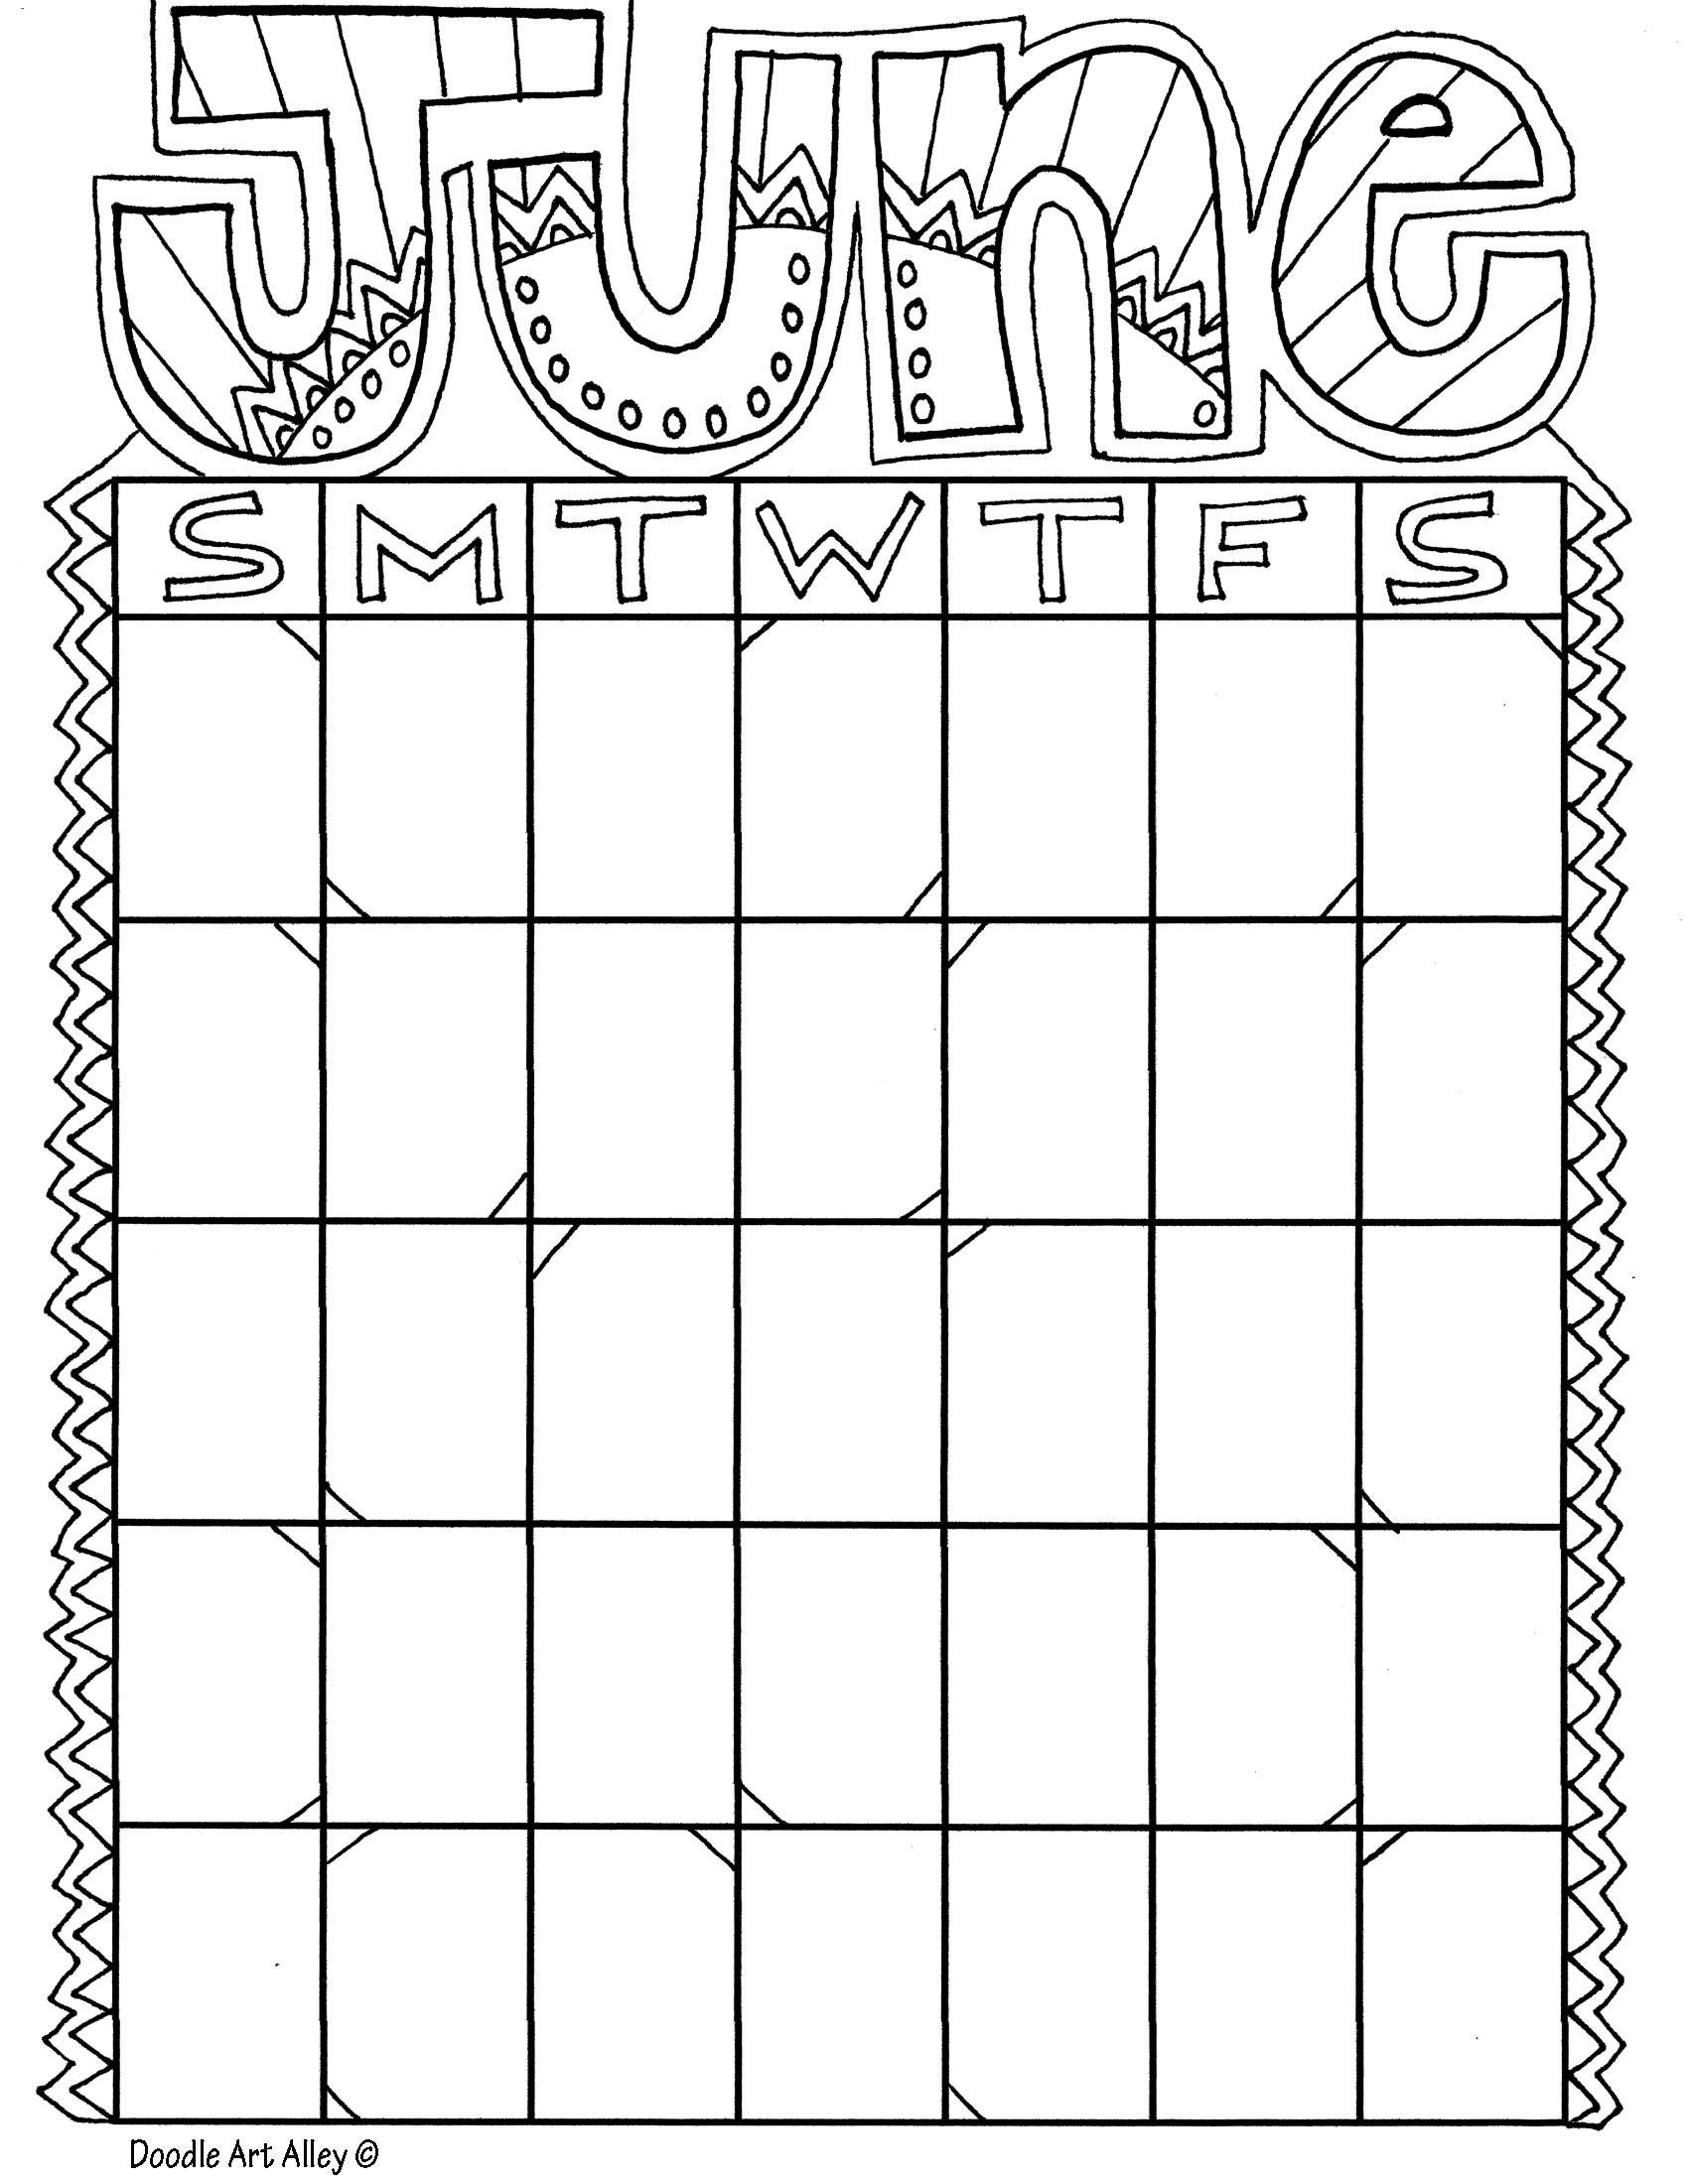 June coloring pages